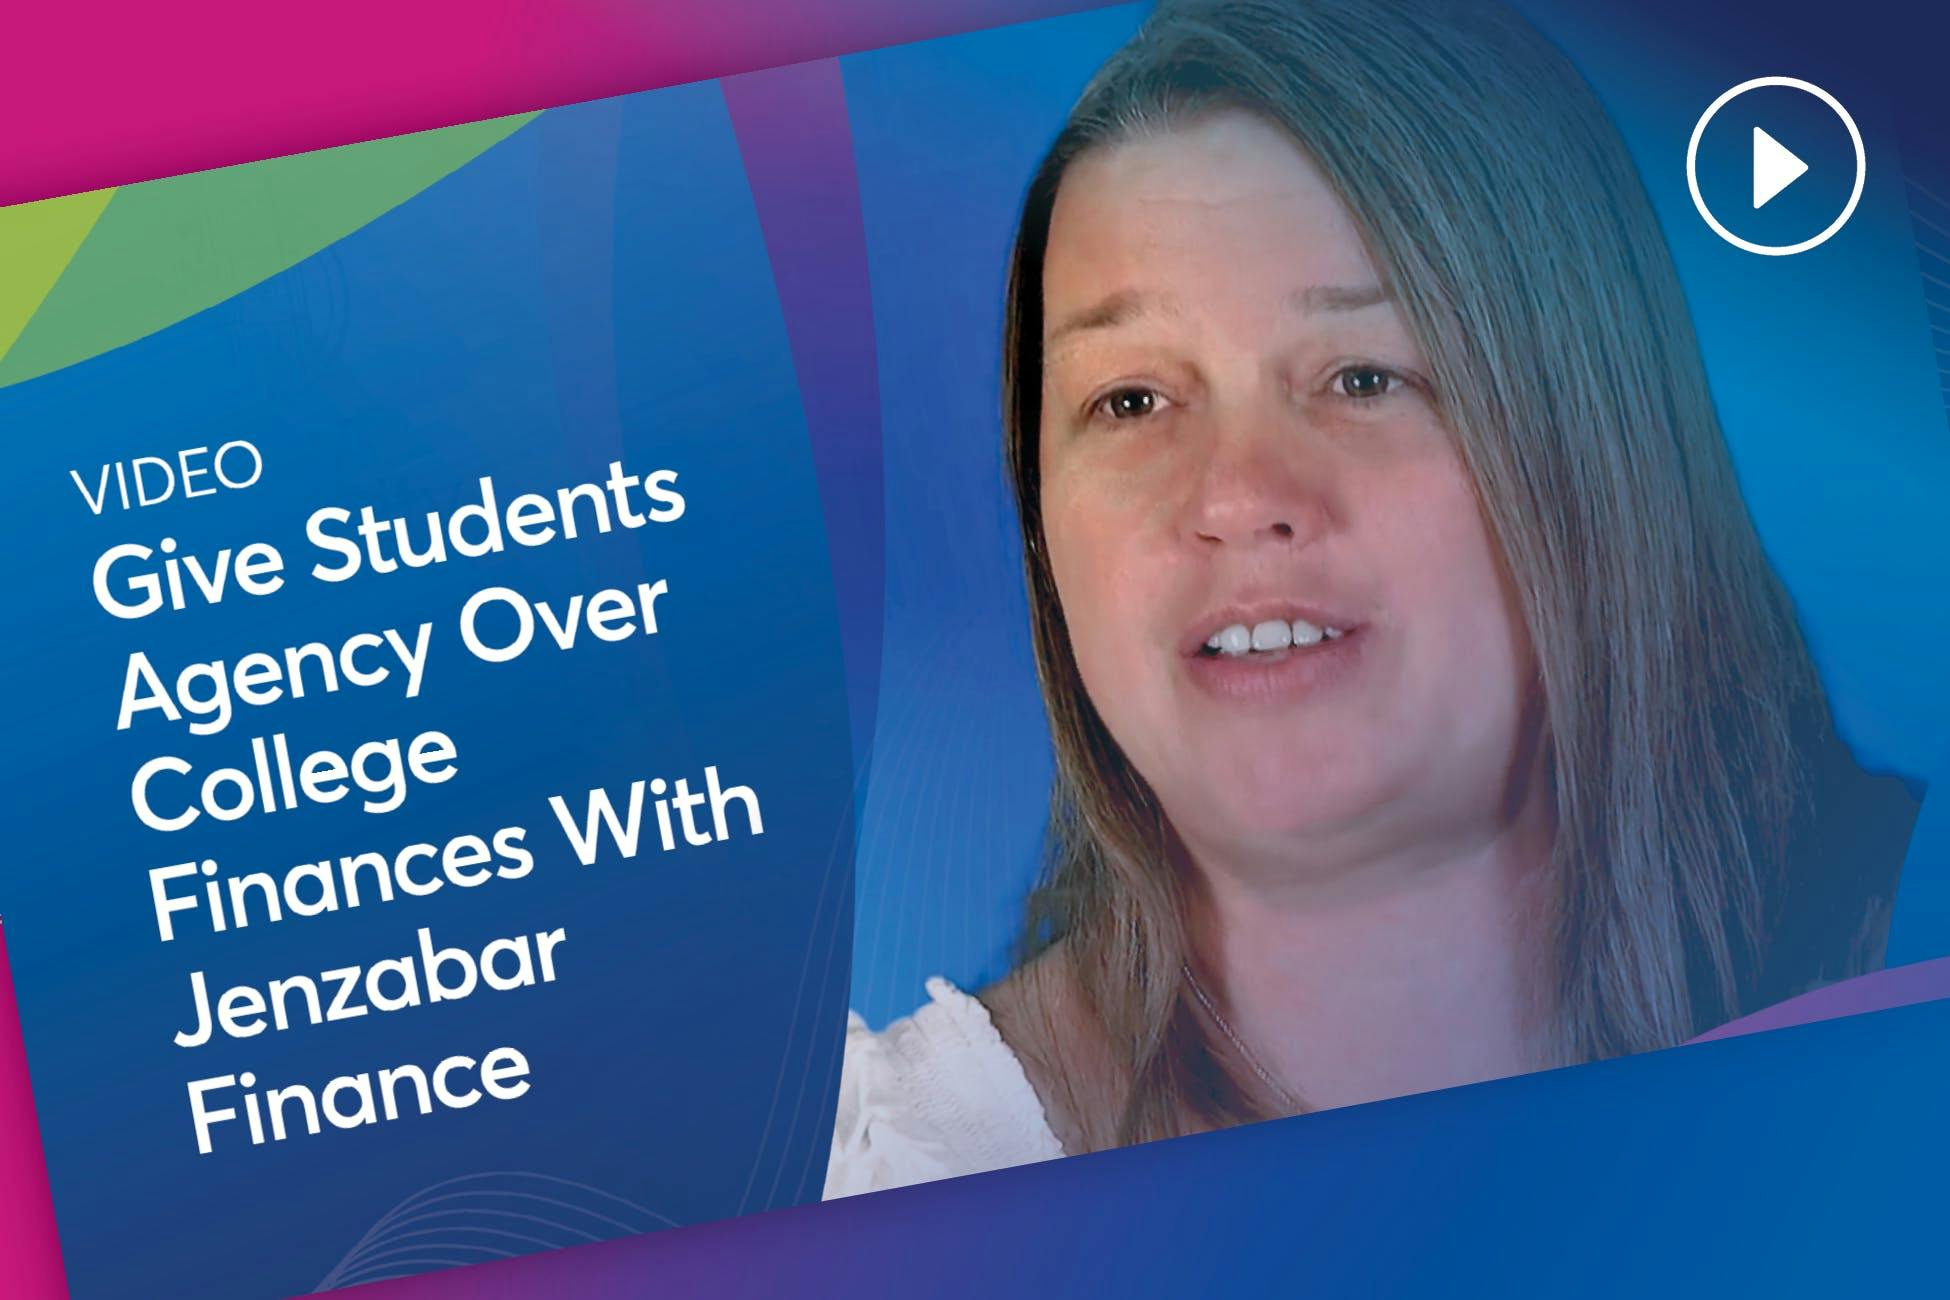 Video: Give Students Agency Over College Finances With Jenzabar Finance